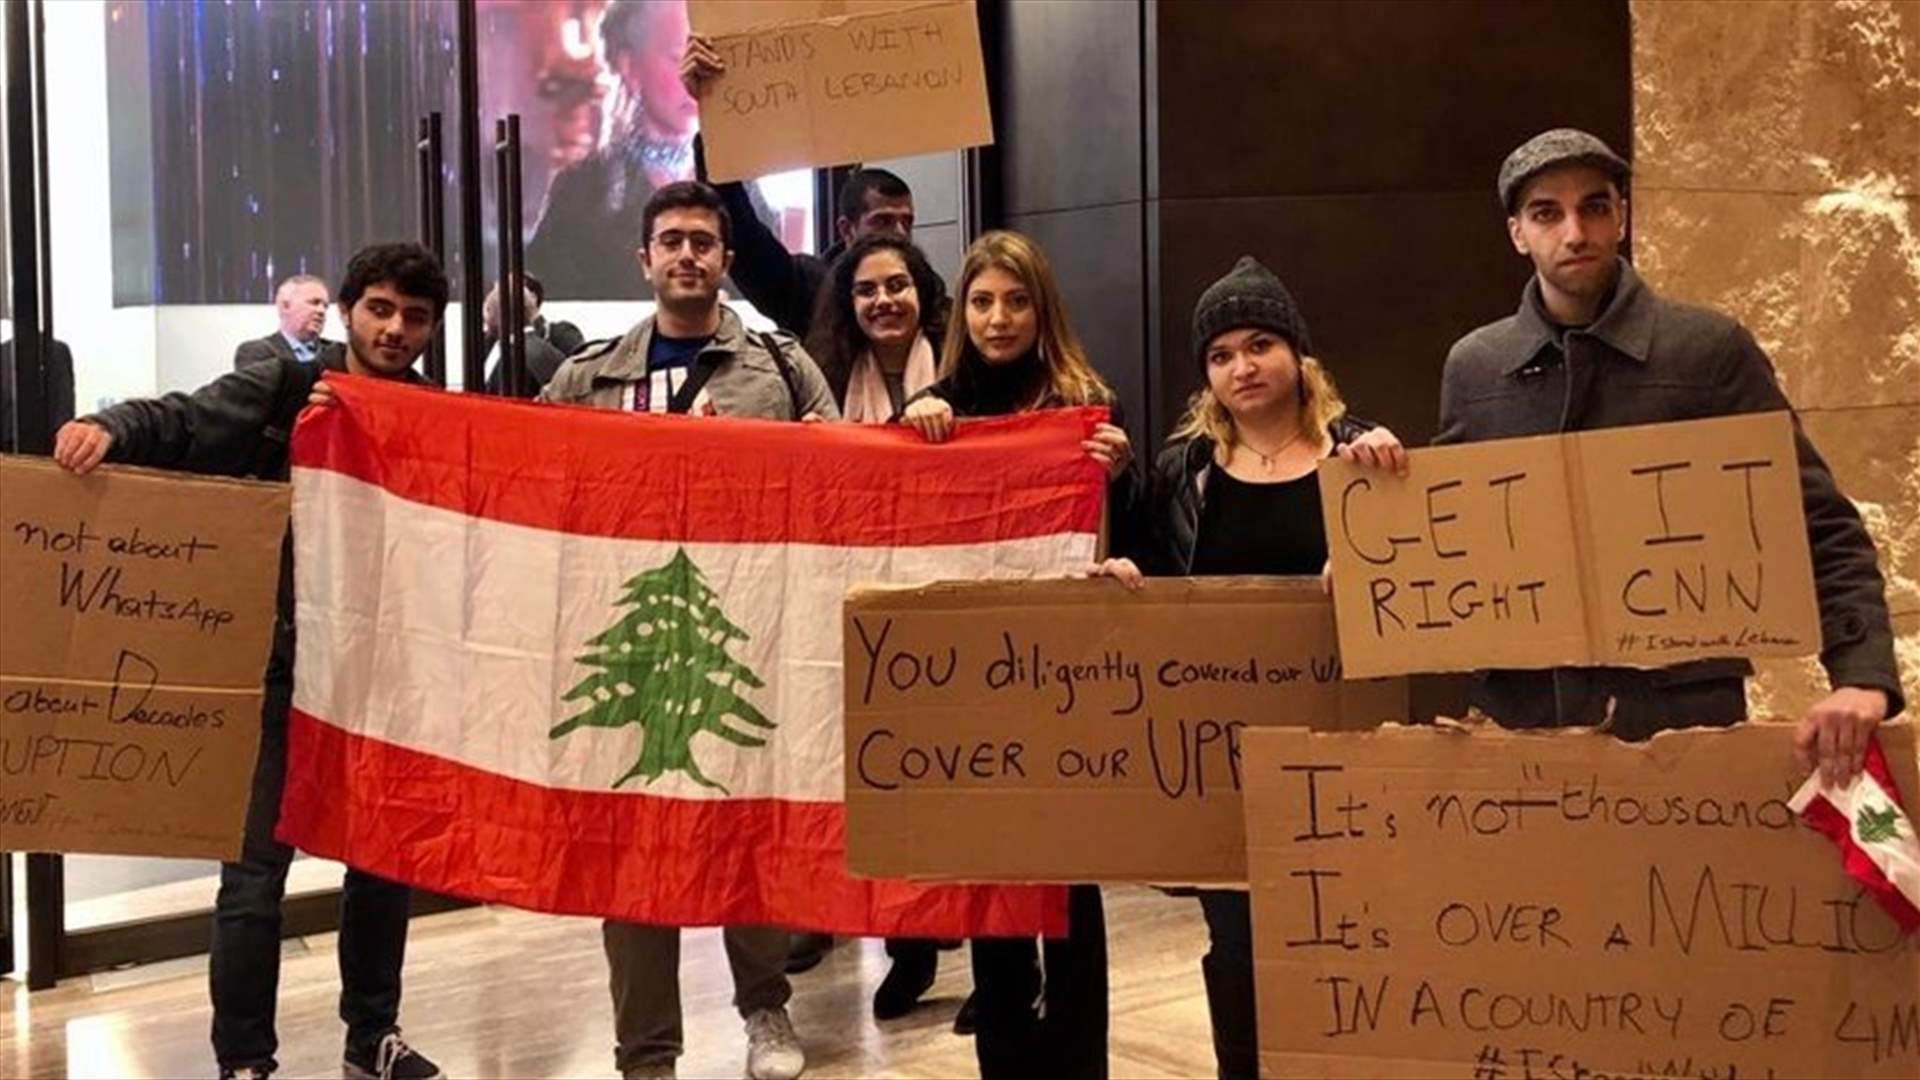 Silent sit-in outside CNN headquarters in support to Lebanon’s revolution-[VIDEOS]